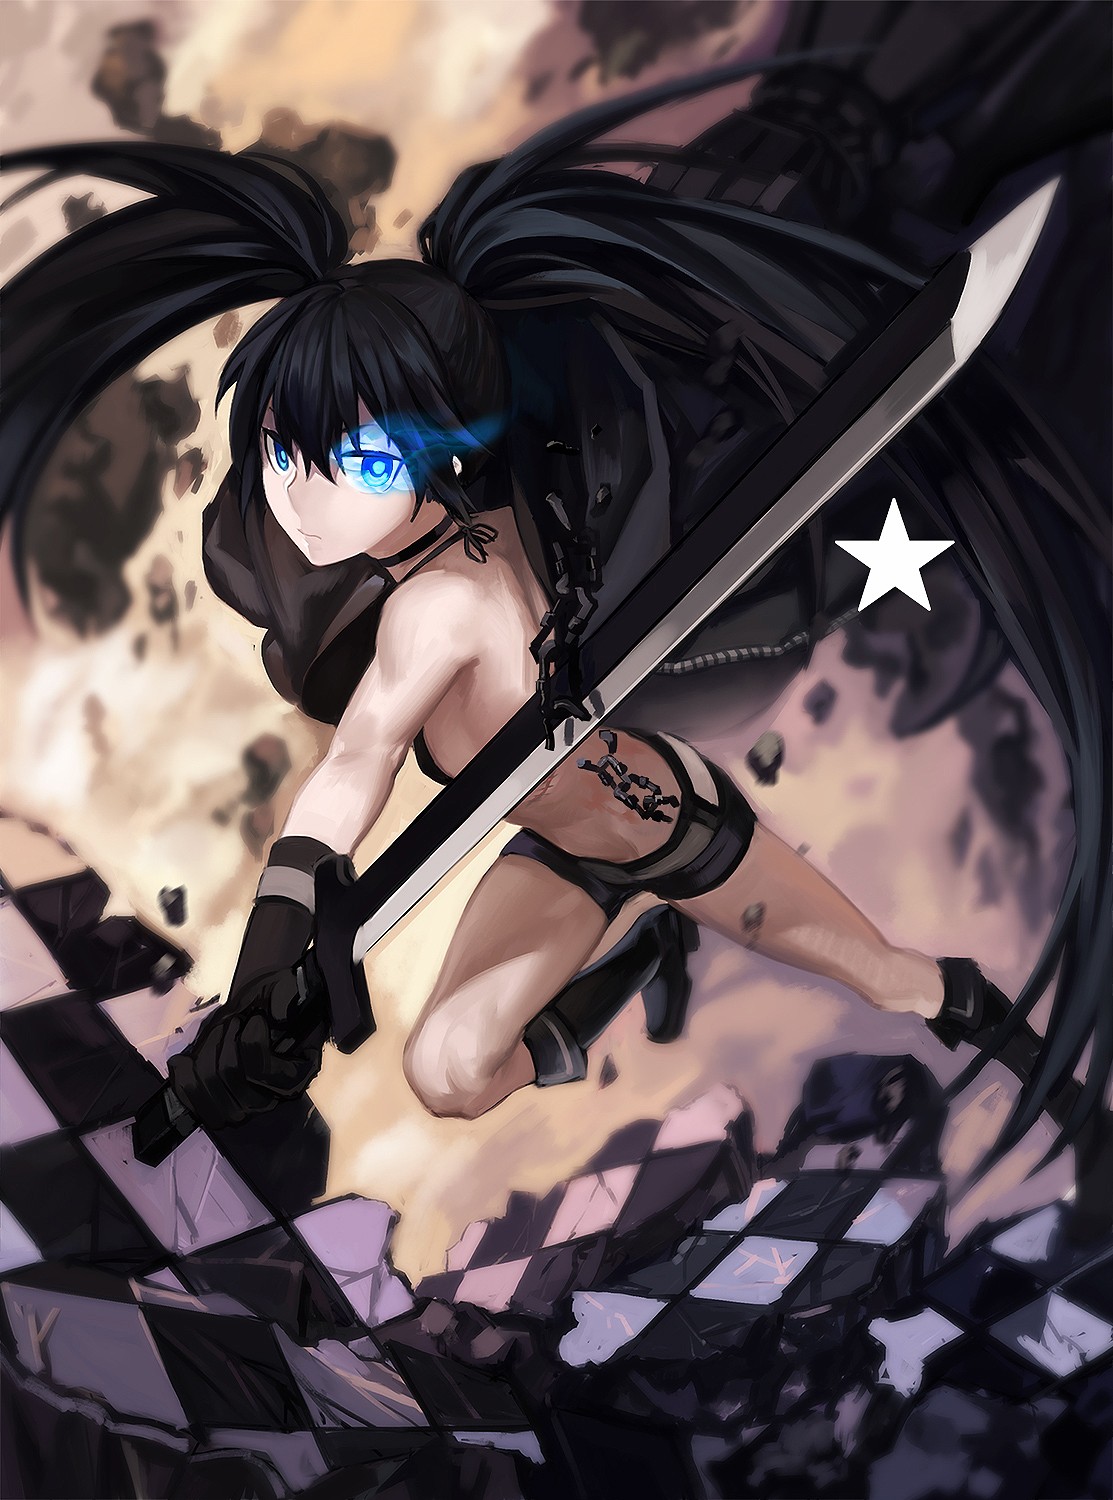 Anime 1113x1500 Black Rock Shooter tiles chains fiery eyes sword twintails jumping anime girls anime blue eyes women with swords dark hair long hair